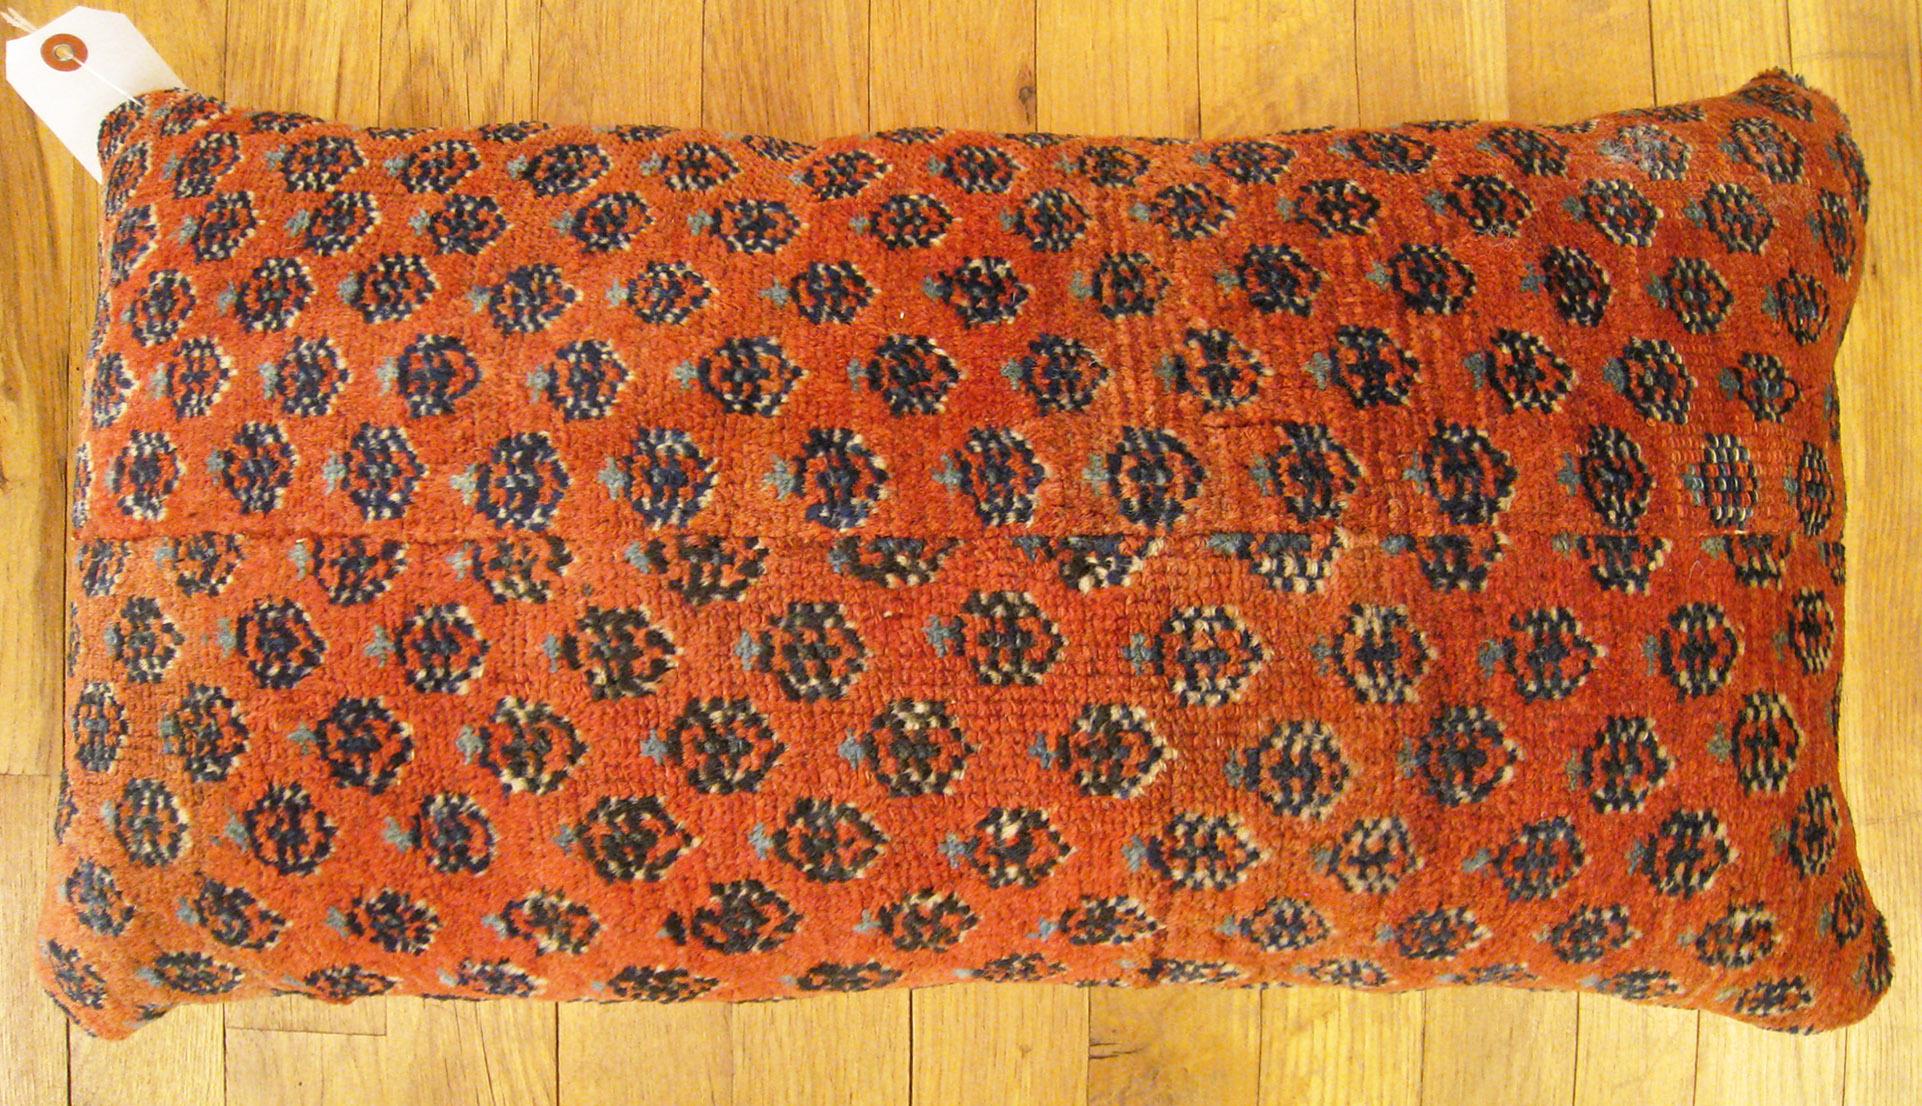 Antique Persian Saraband carpet pillow; size 2'0” x 1'2”.

An antique decorative pillow with floral elements allover a red central field, size 2'0” x 1'2”. This lovely decorative pillow features an antique fabric of a Saraband carpet on front